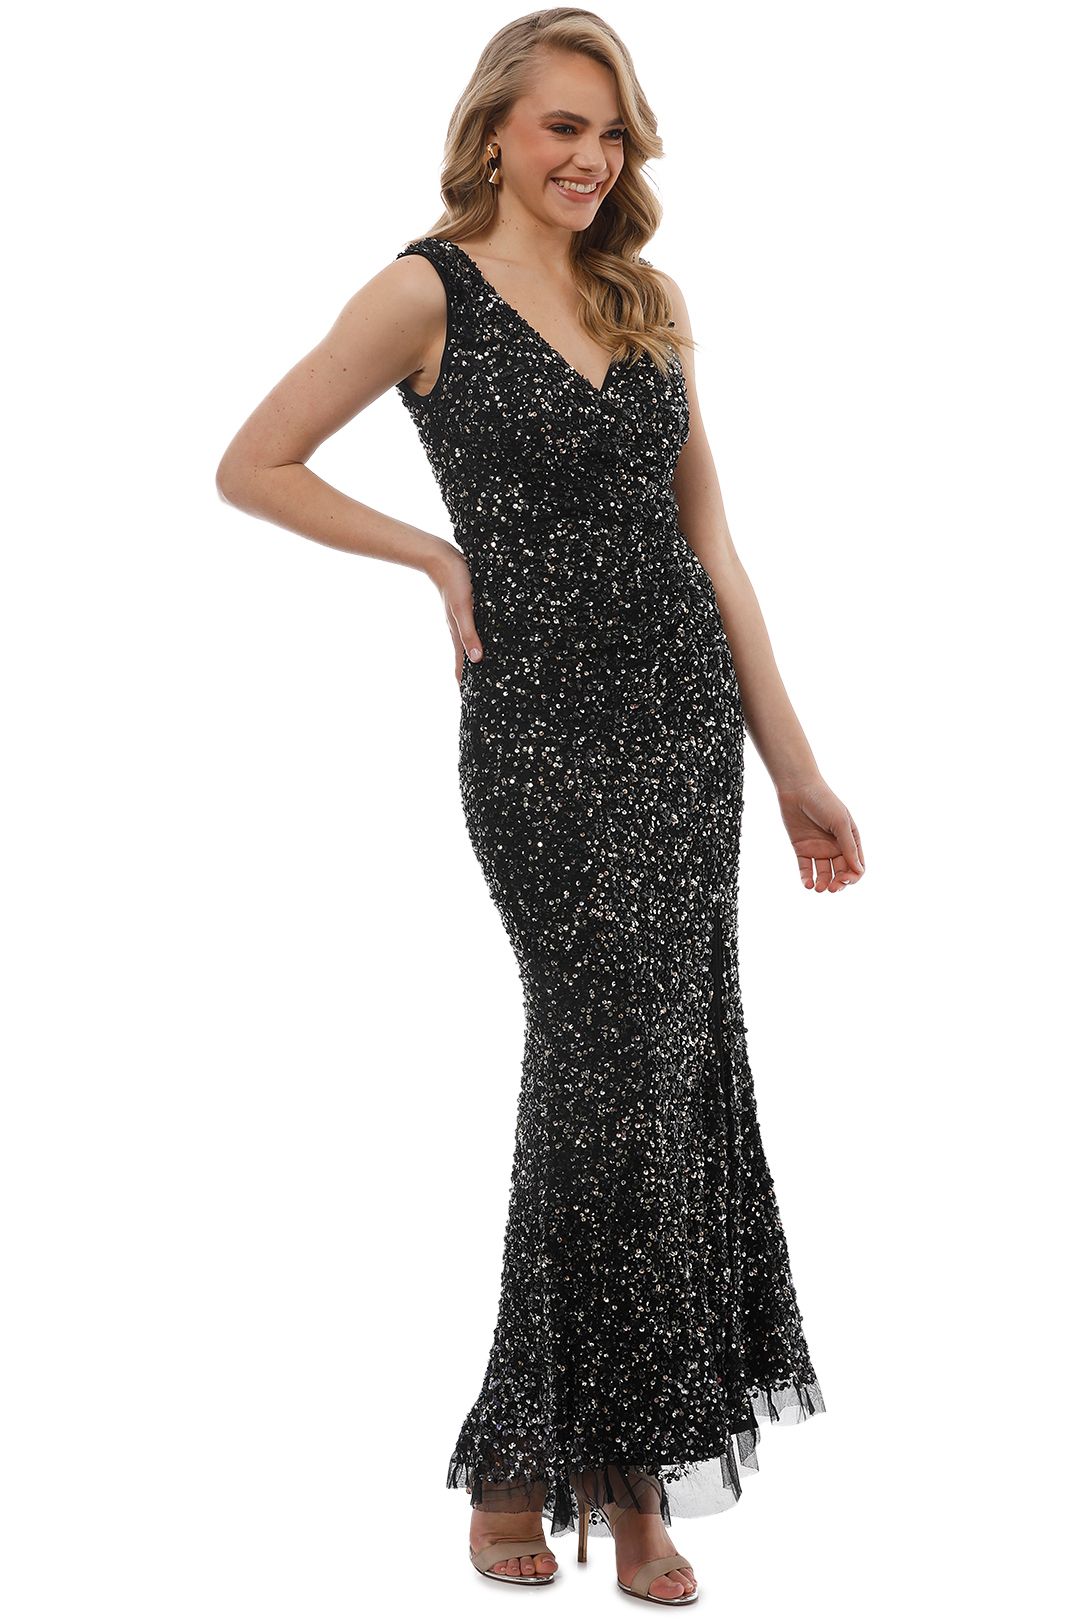 Montique - Layla Hand Beaded Dress - Gold Sequin - Side